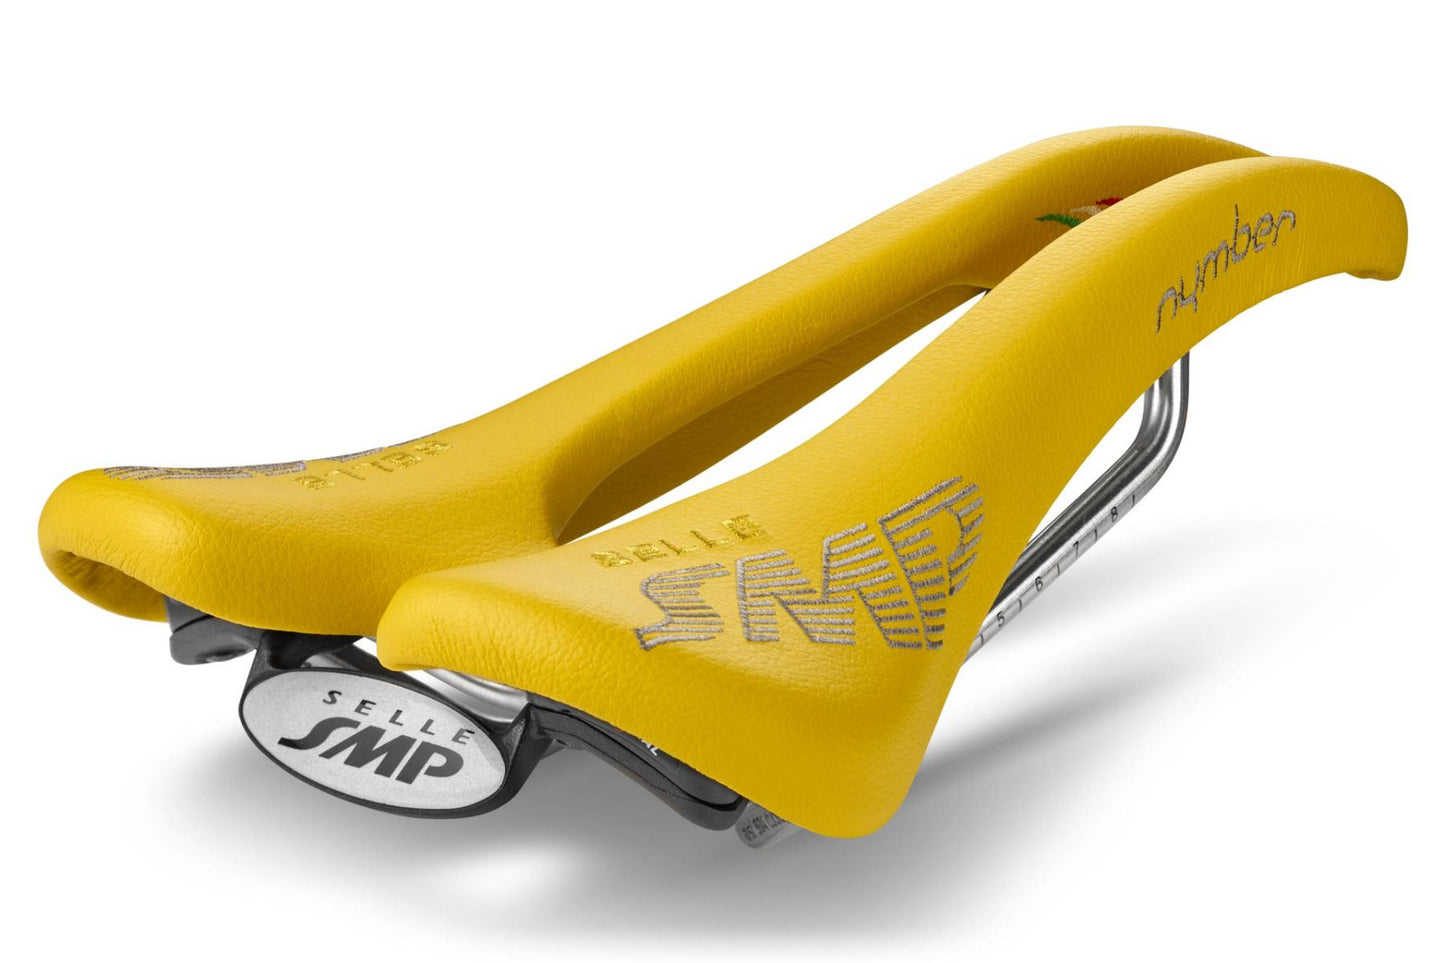 Selle SMP Nymber Saddle with Steel Rails (Yellow)